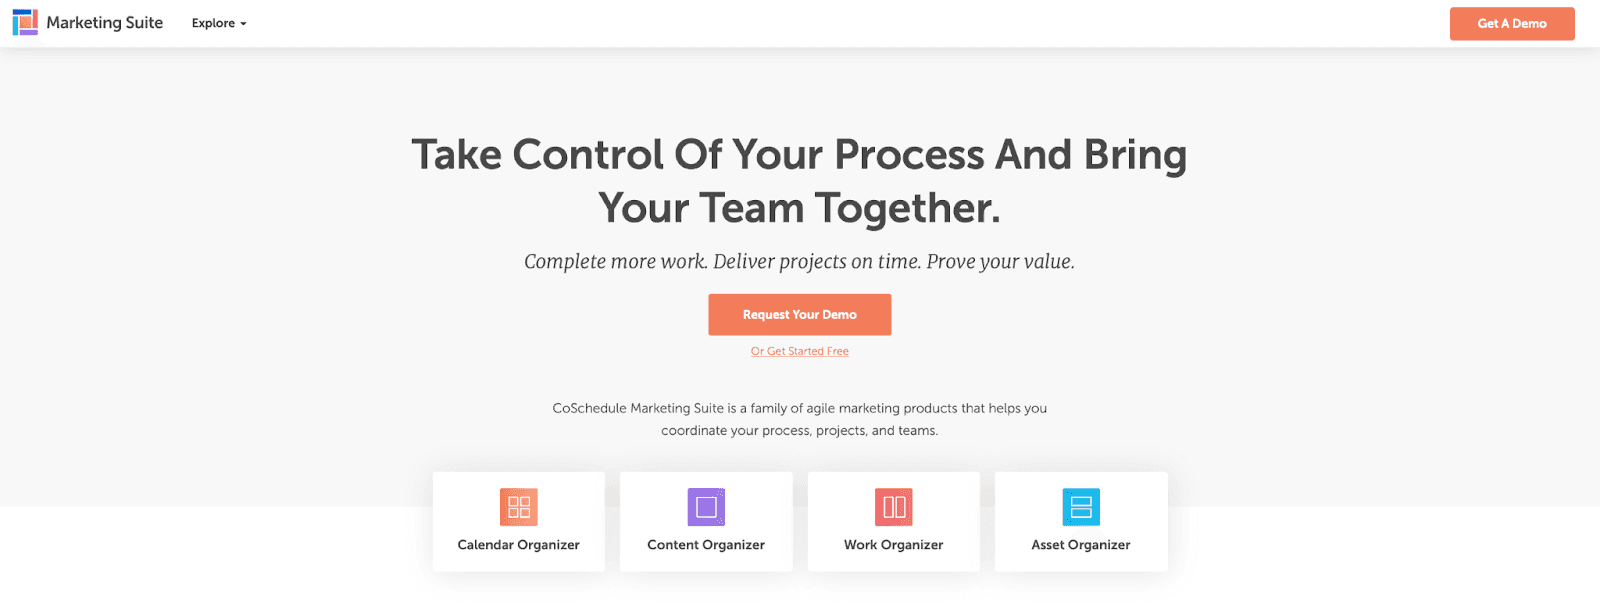 CoSchedule Marketing Suite landing page